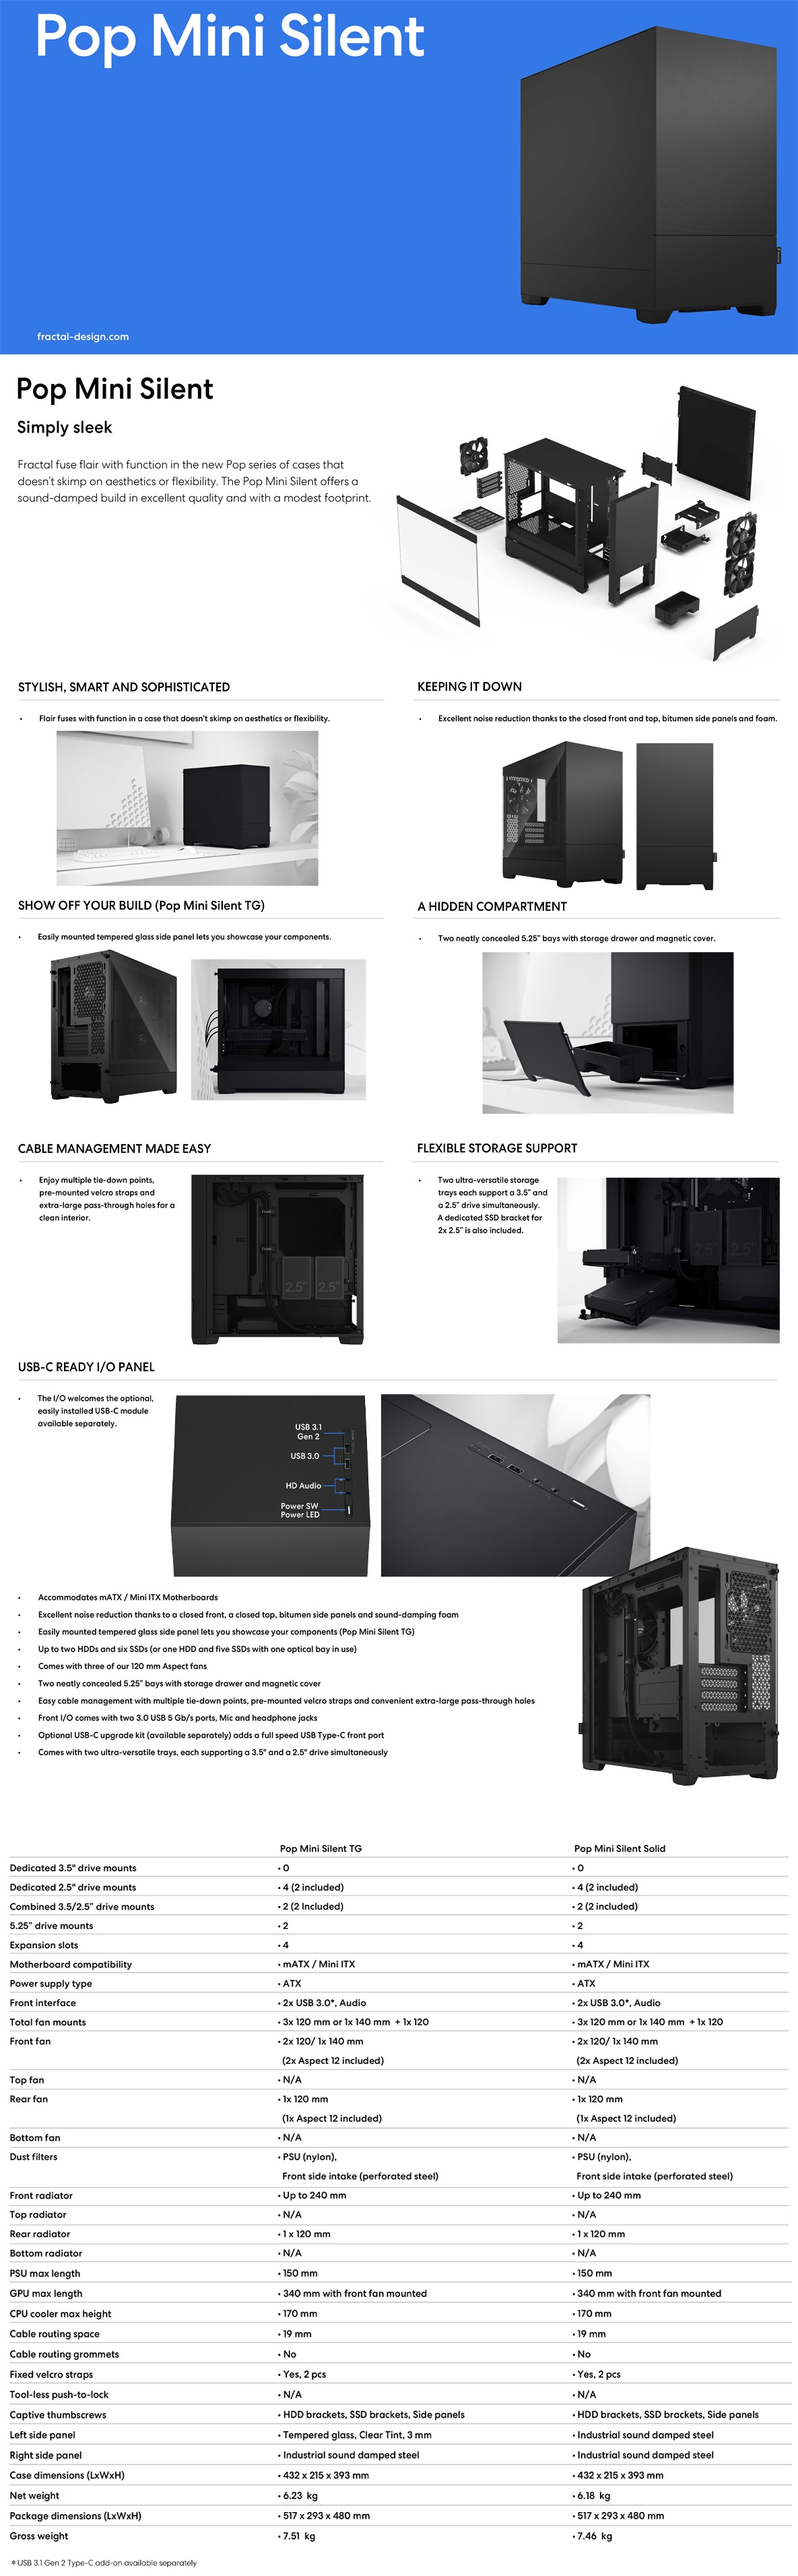 A large marketing image providing additional information about the product Fractal Design Pop Mini Silent TG Clear Tint Micro Tower Case - Black - Additional alt info not provided